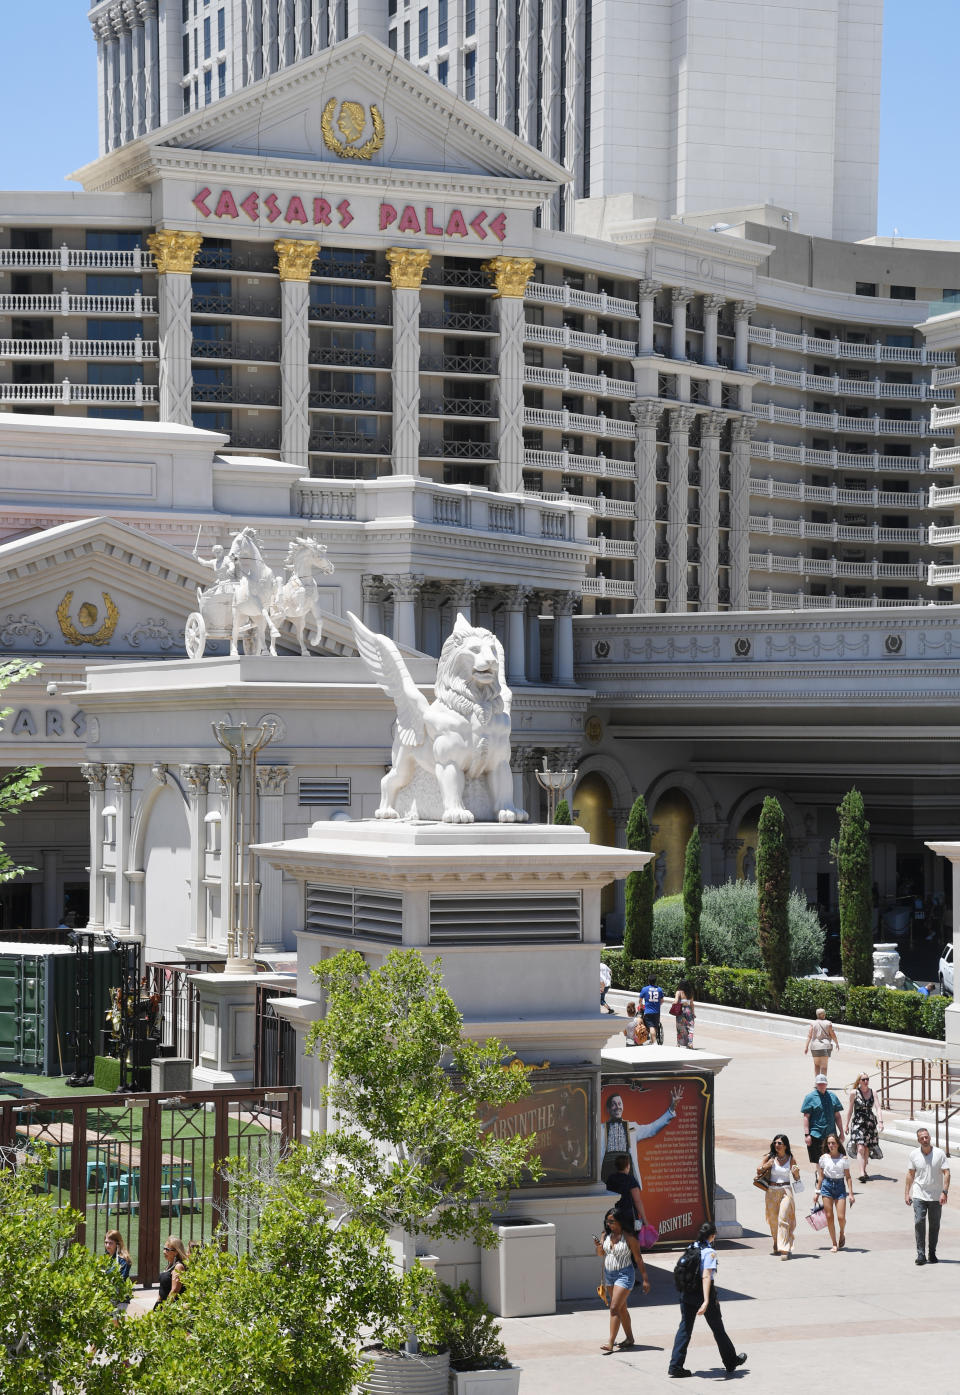 LAS VEGAS, NEVADA - JUNE 24:  An exterior view shows Caesars Palace on the Las Vegas Strip on June 24, 2019 in Las Vegas, Nevada. Eldorado Resorts announced today that it would acquire Caesars Entertainment Corp. for USD 17.3 billion.  (Photo by Ethan Miller/Getty Images)